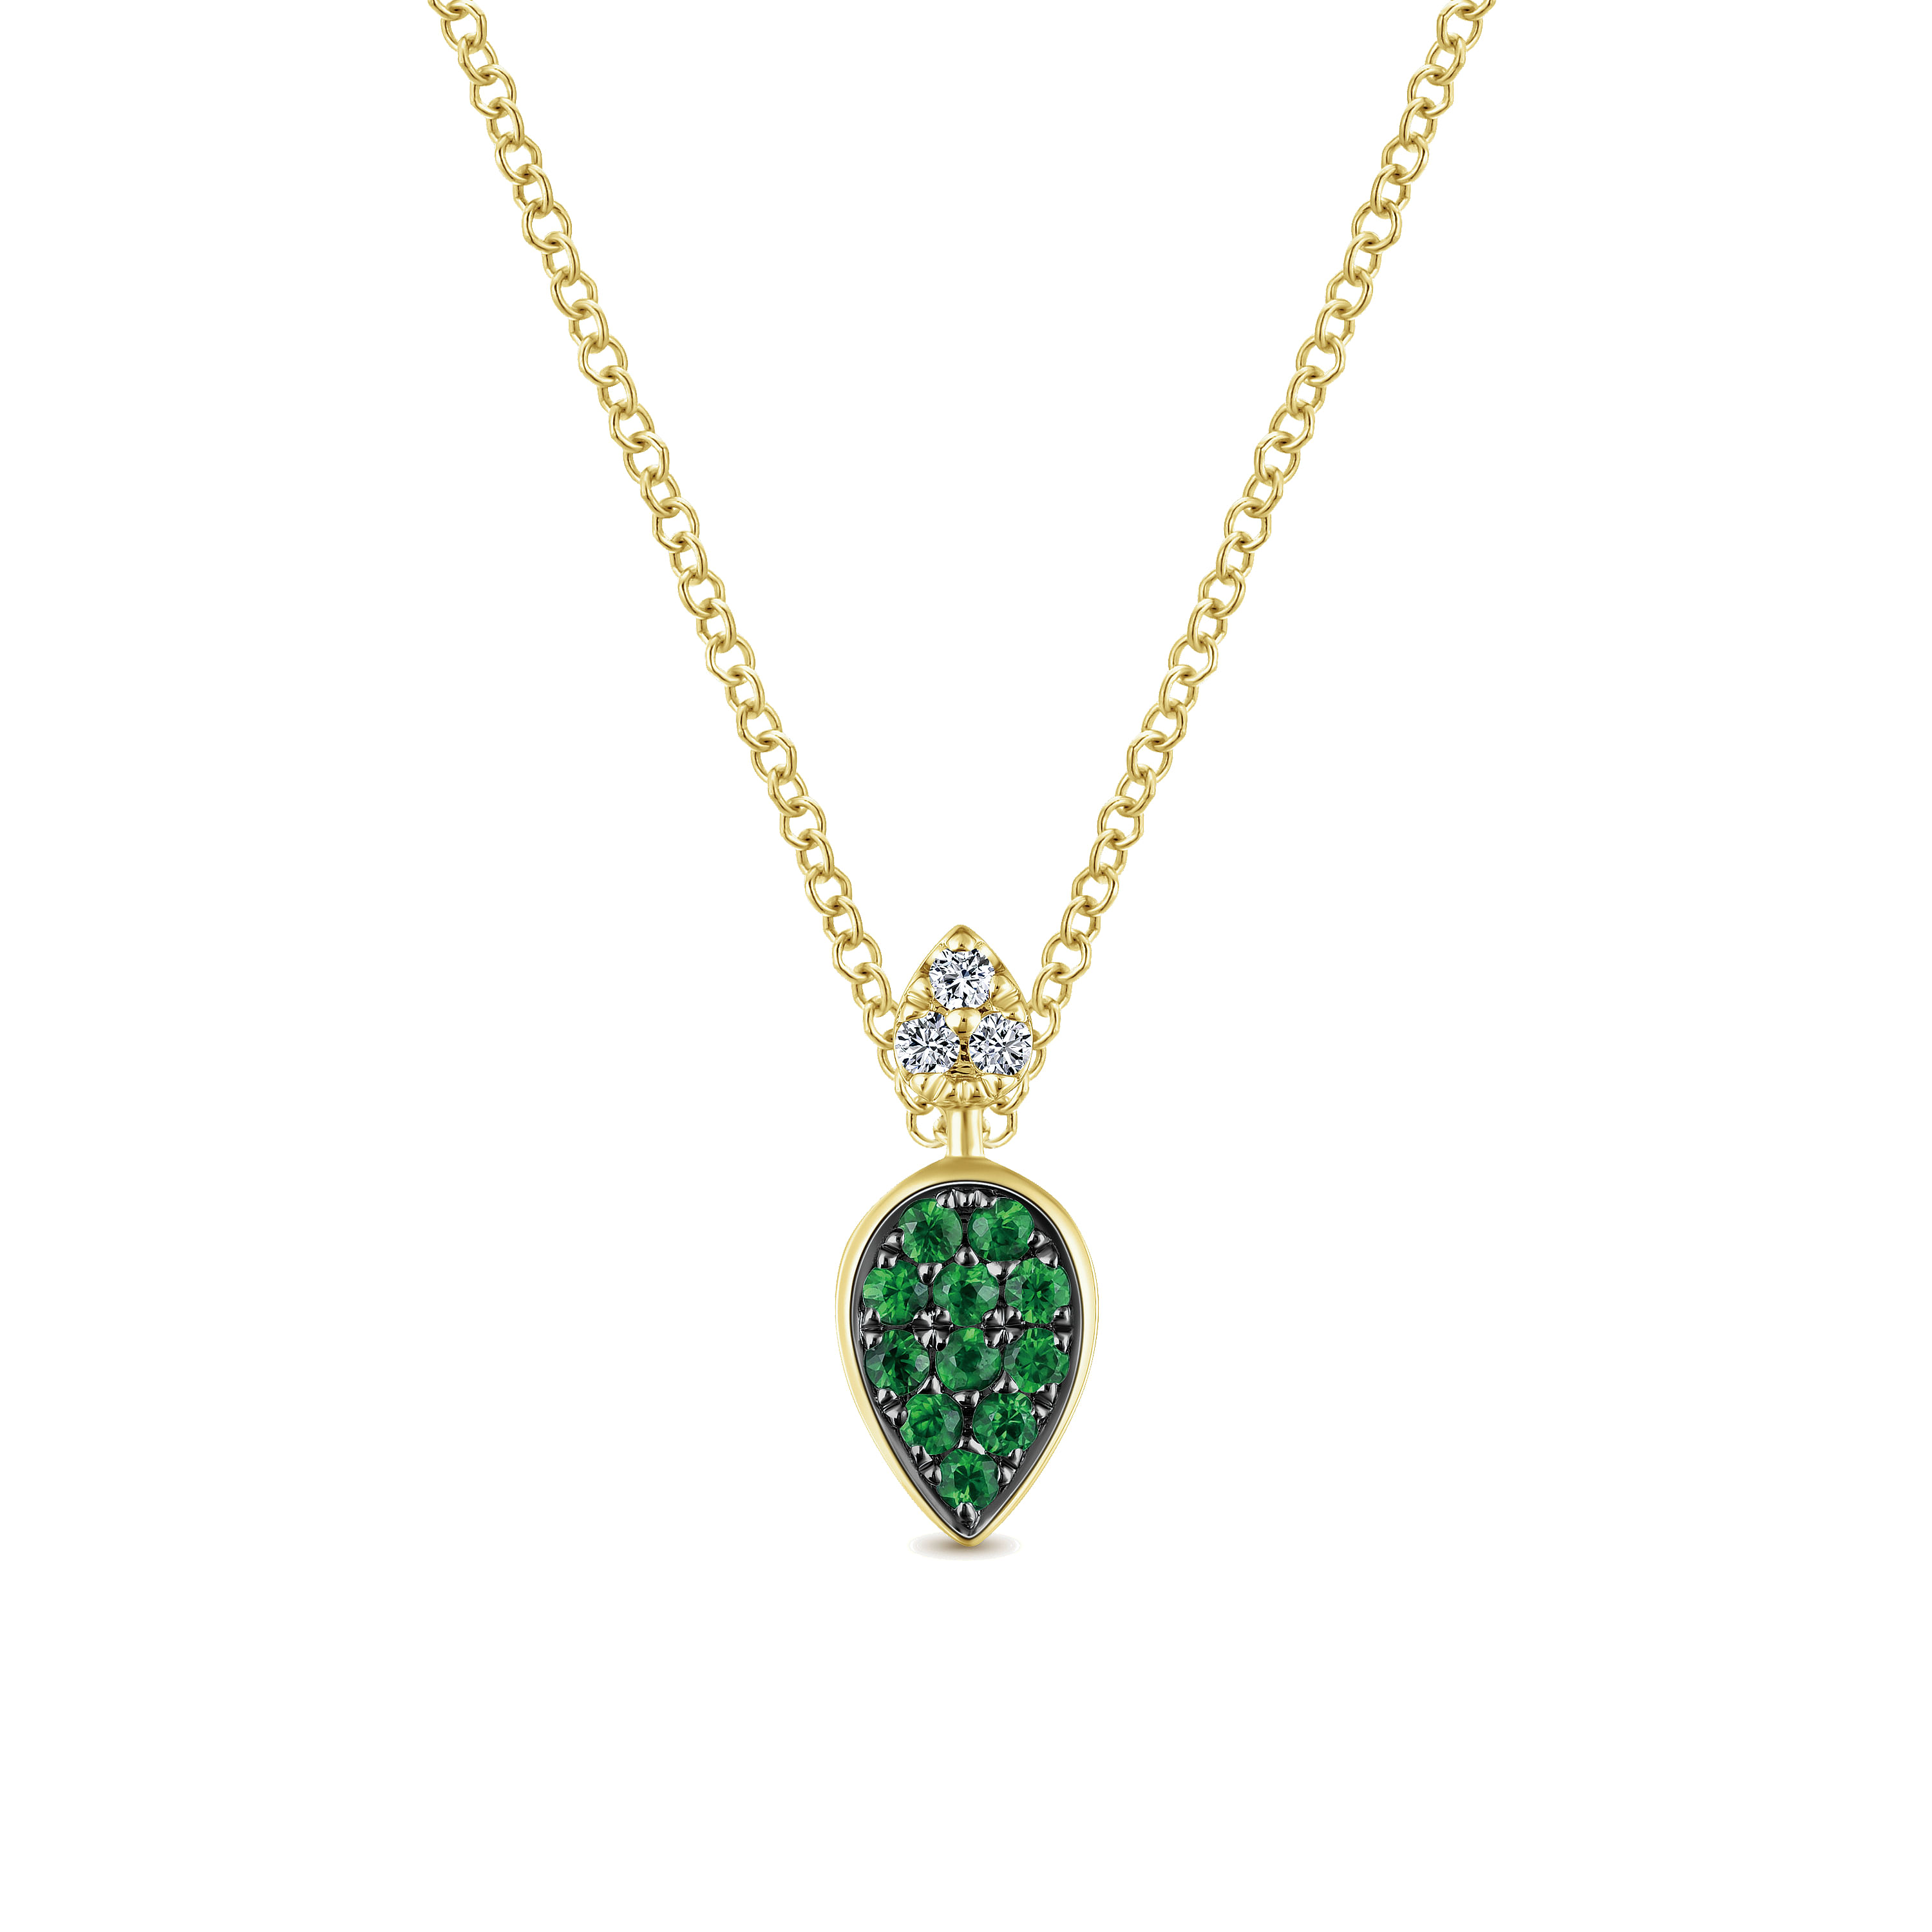 14K Yellow Gold Teardrop Pendant Necklace with Emeralds and Diamonds